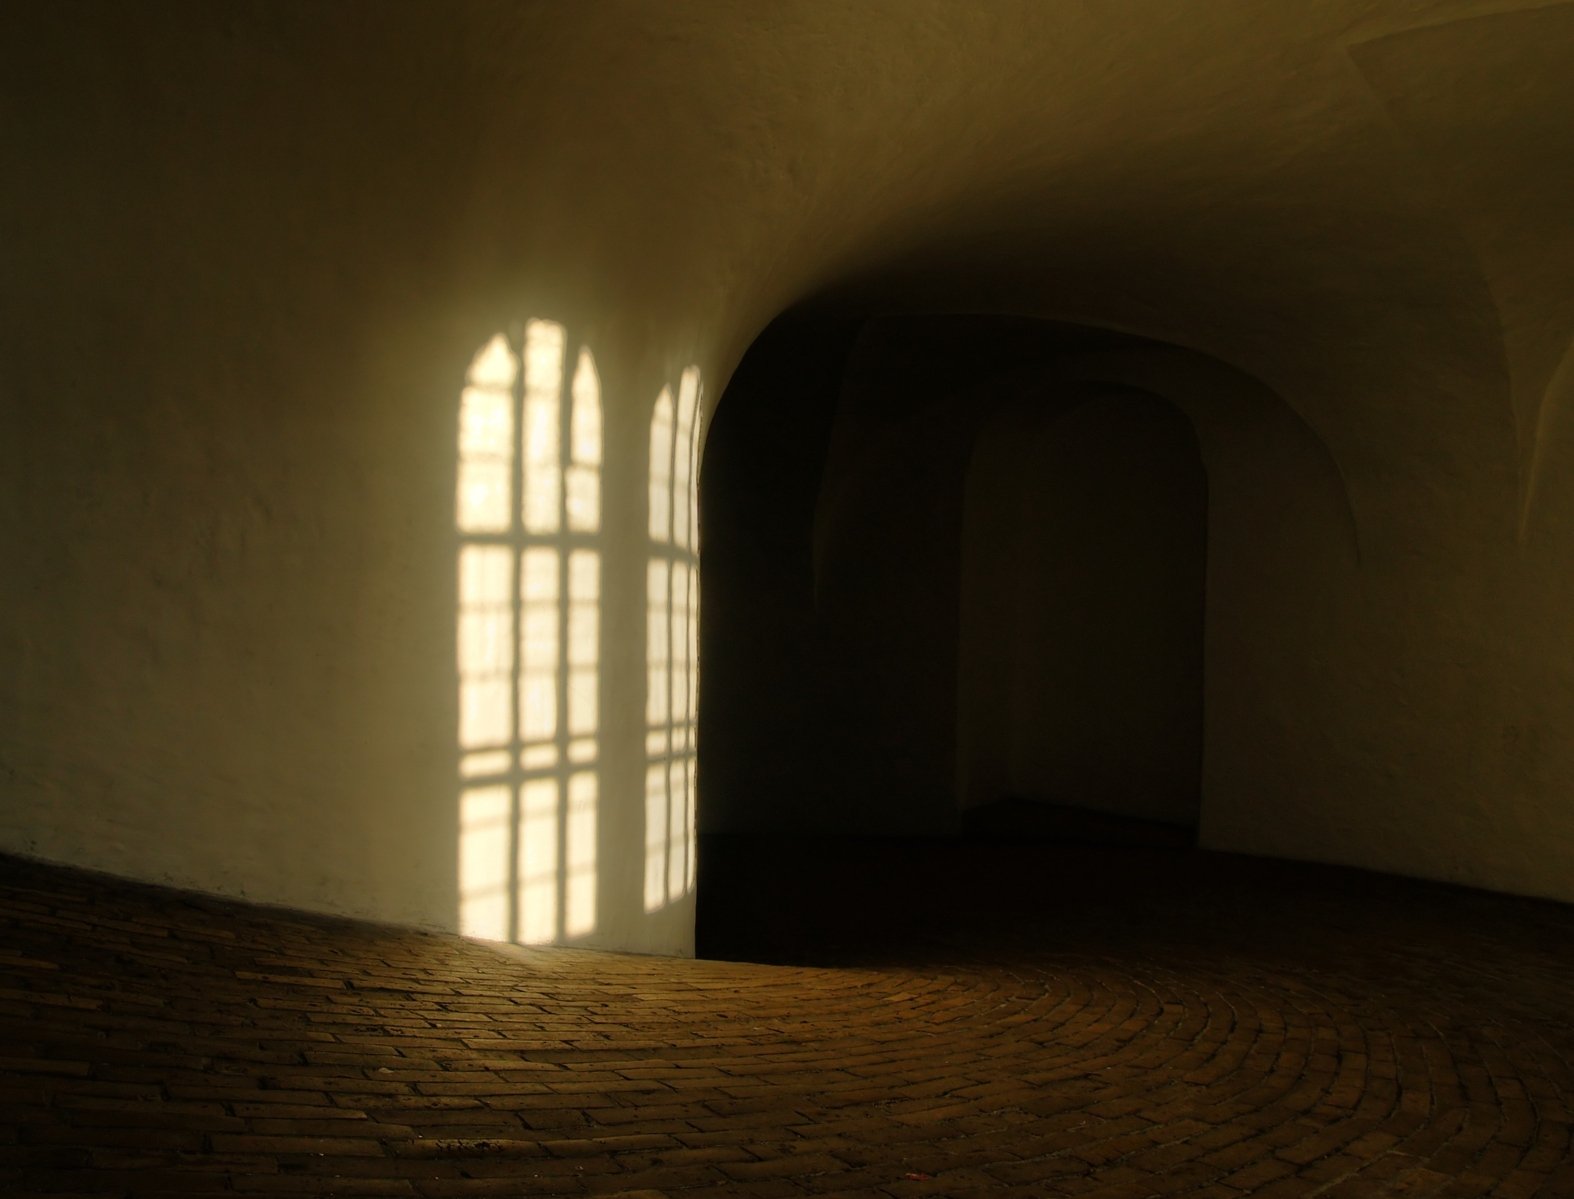 bright window shining in between two white walls in a dimly lit building